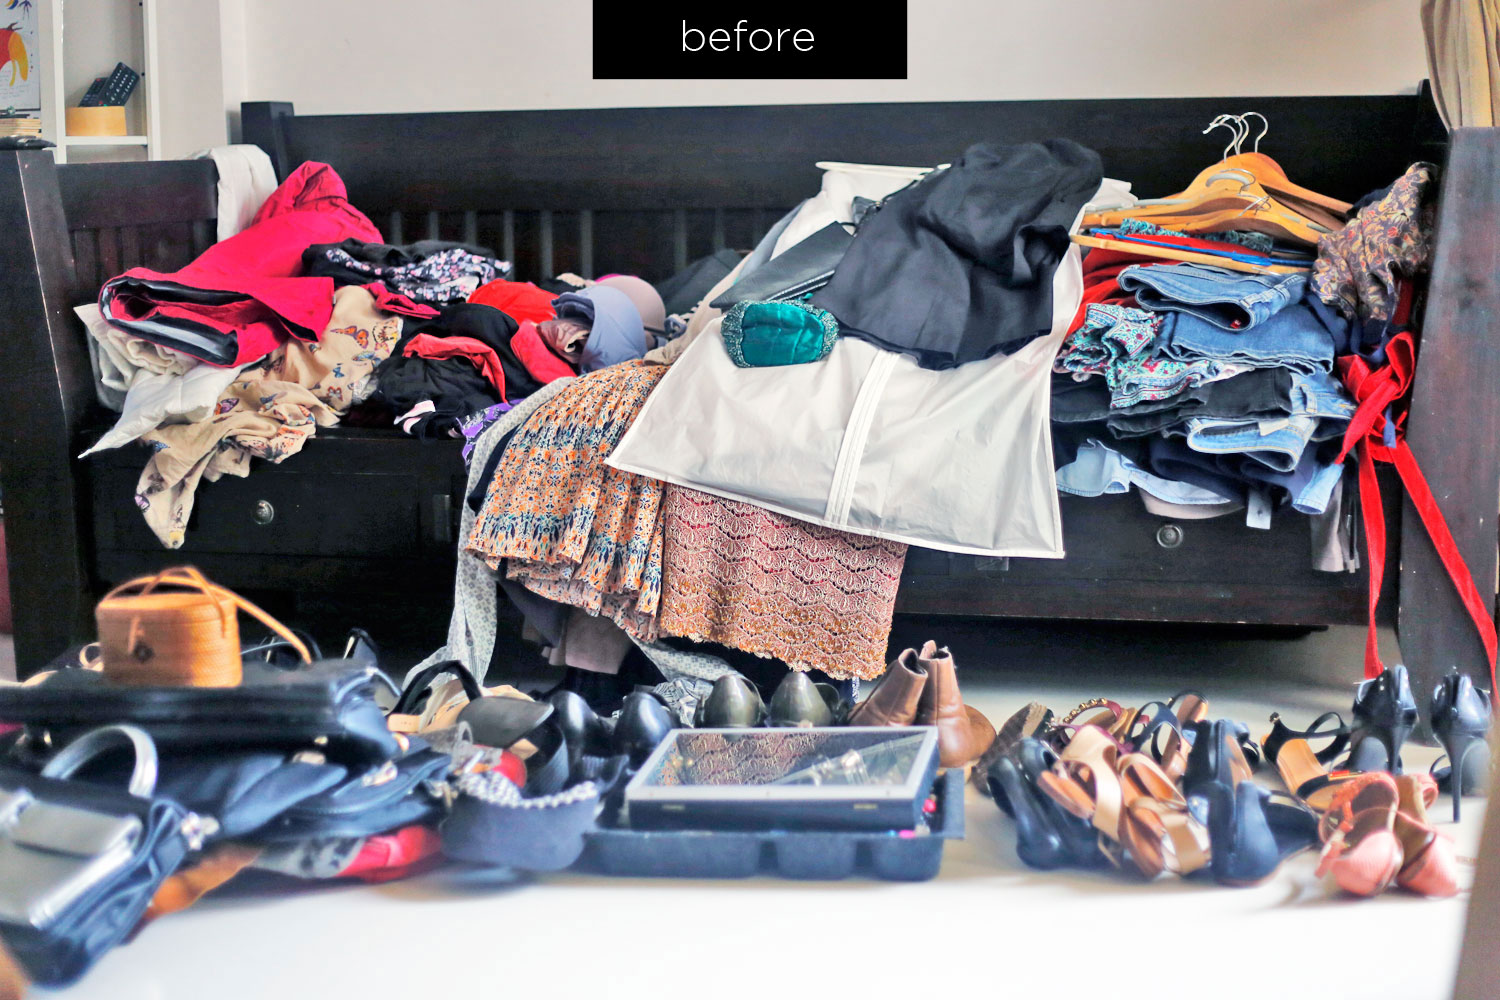 5 Lessons Learned When Decluttering for Good